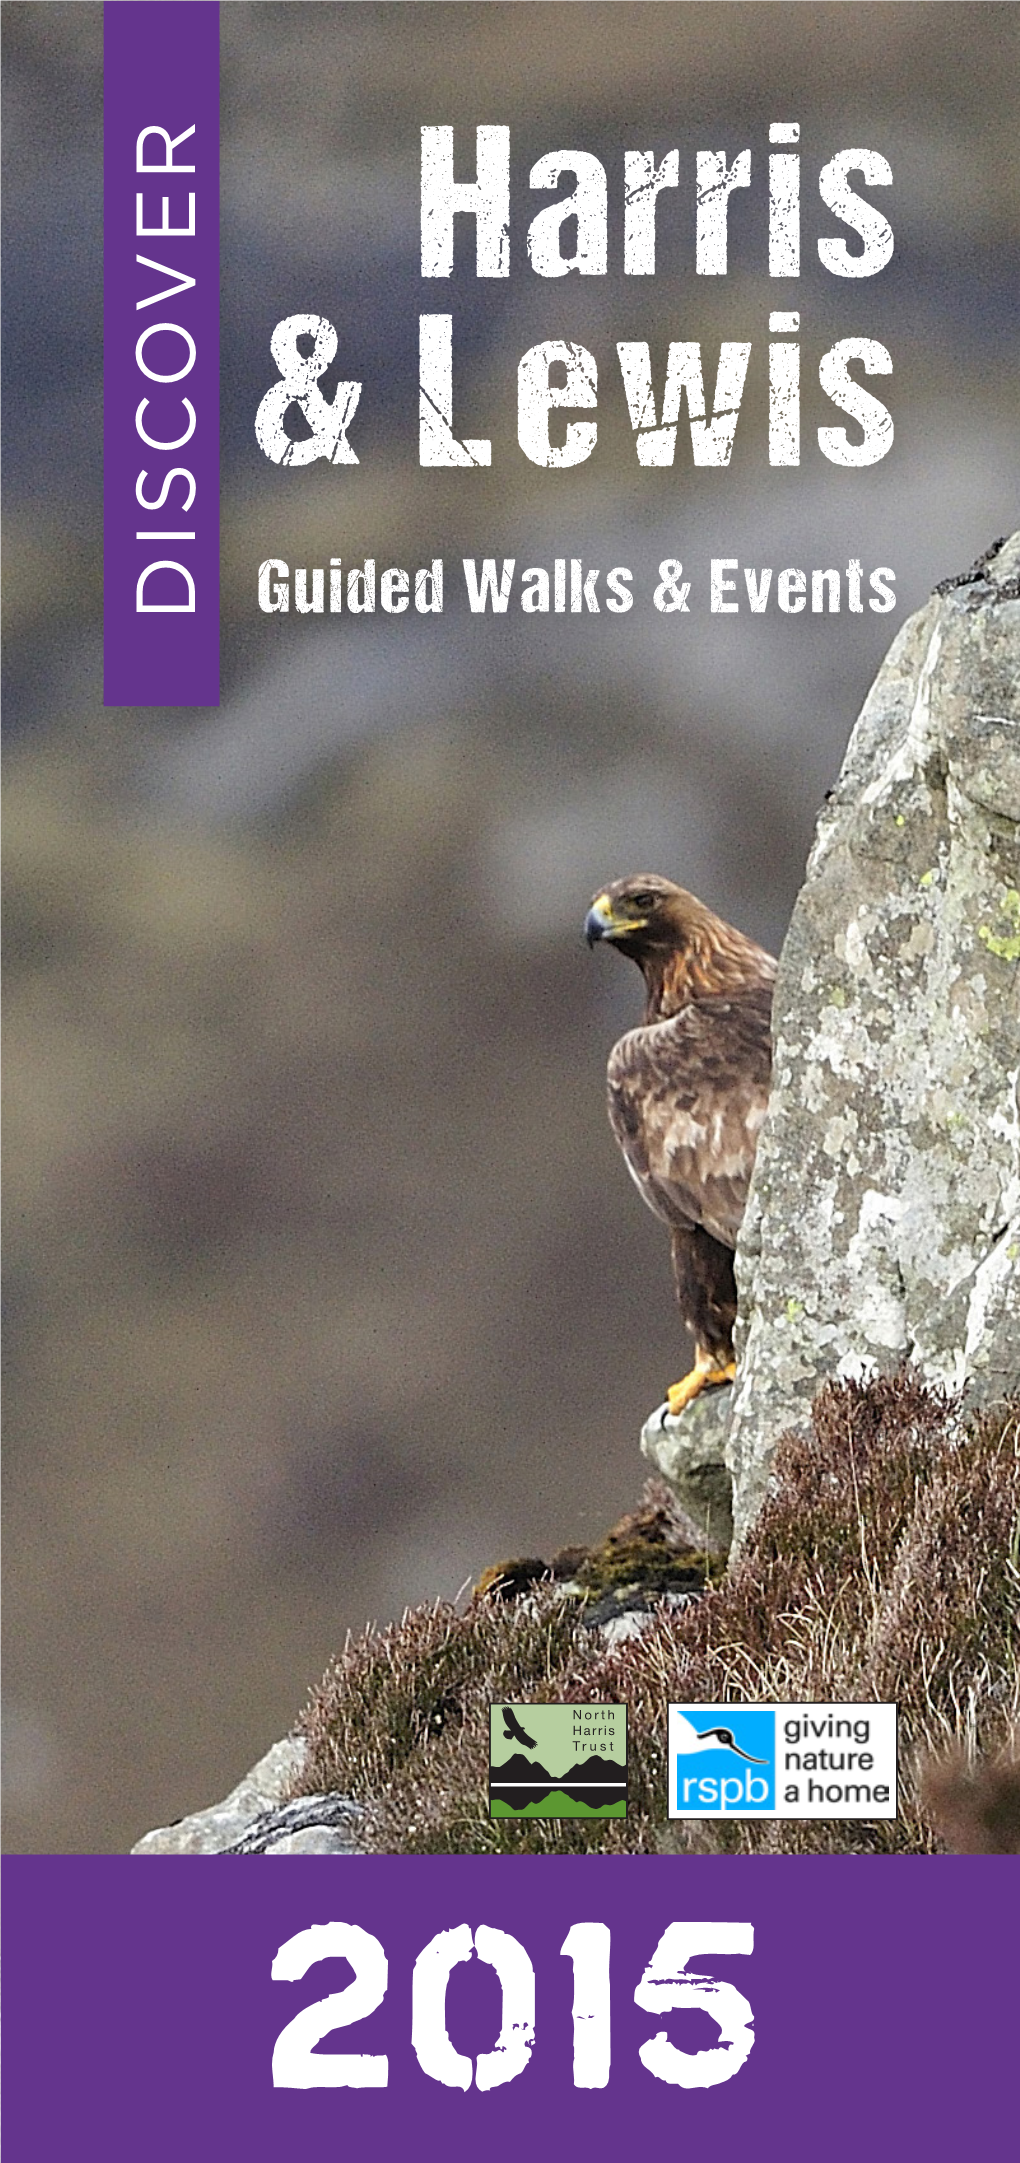 Guided Walks & Events